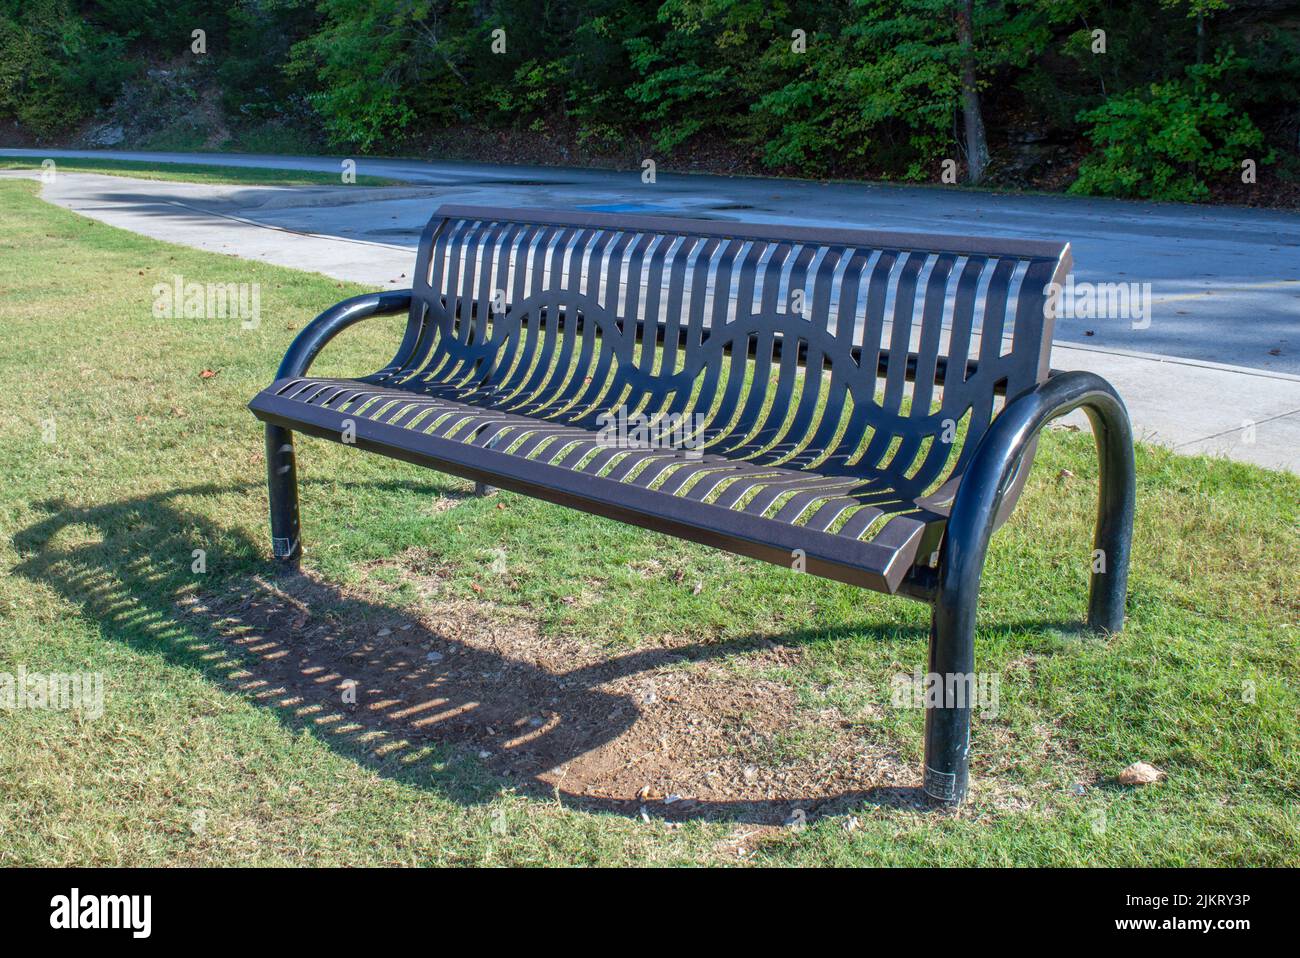 A nice black park bench looks cozy and inviting next to this park side road. Lush green trees in the background provide a peaceful setting. Stock Photo